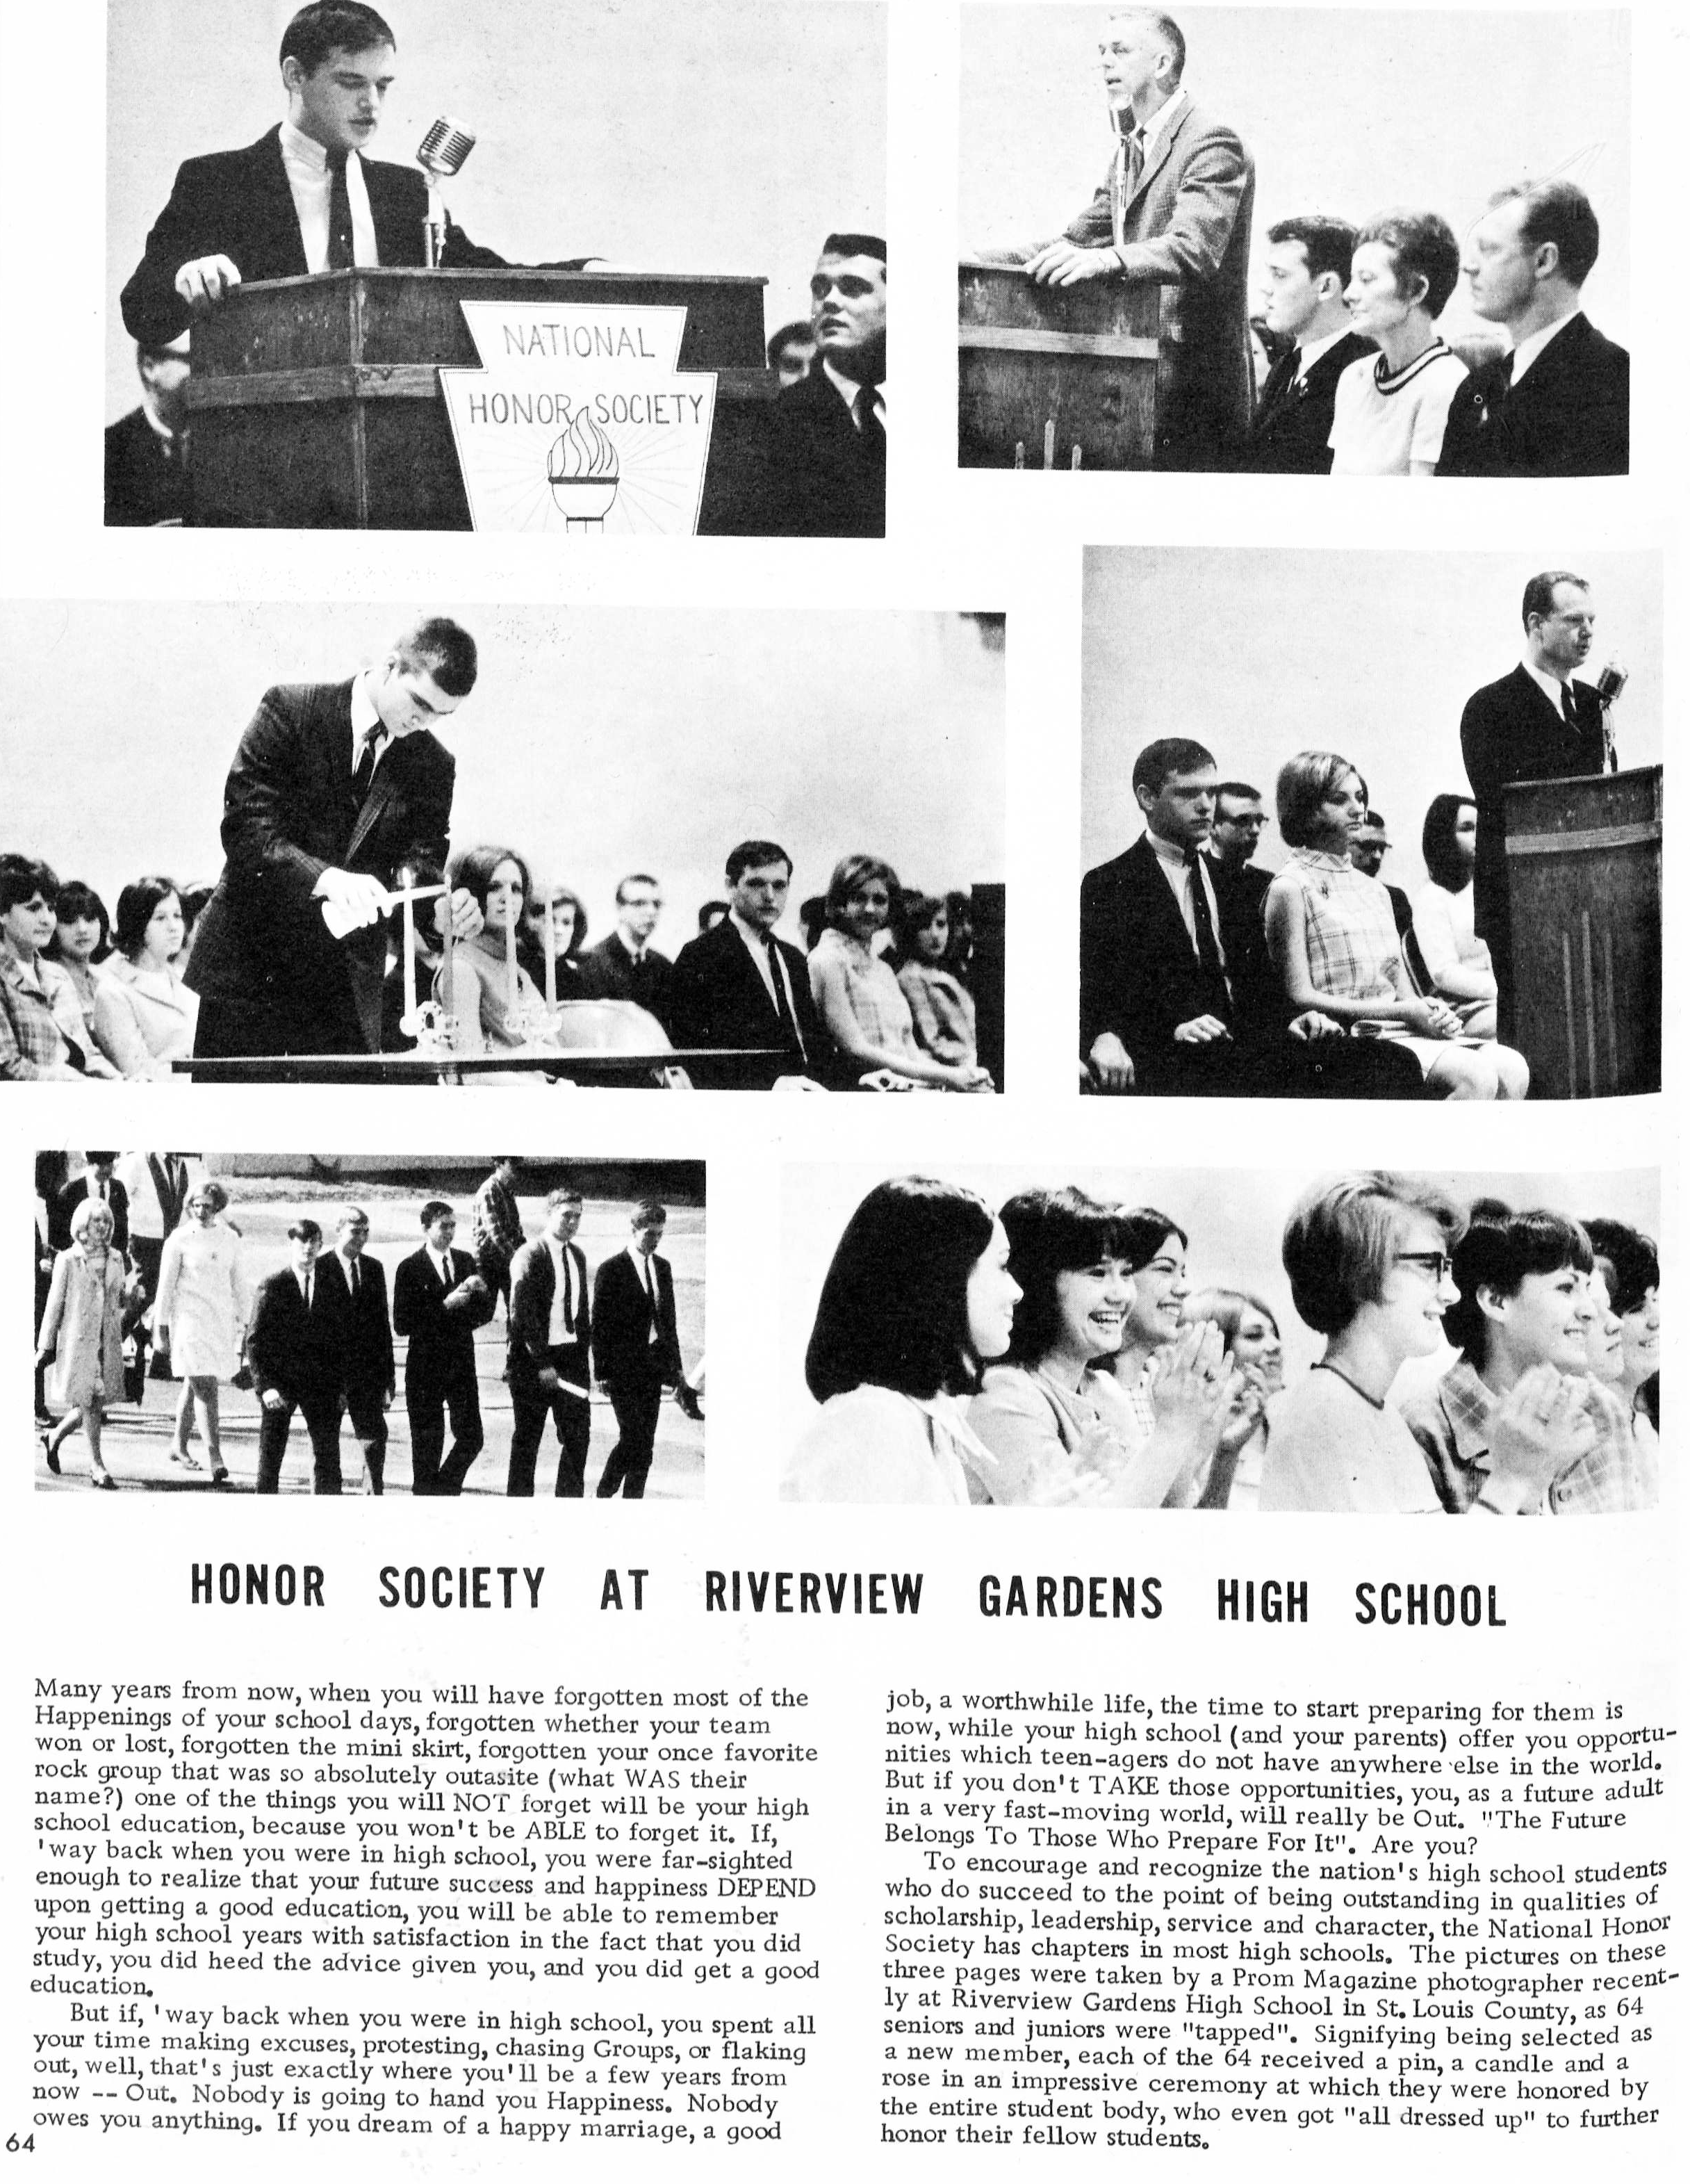 RGHS NATIONAL HONOR SOCIETY TAPPING CEREMONY featured in PROM MAGAZINE APRIL 1968 